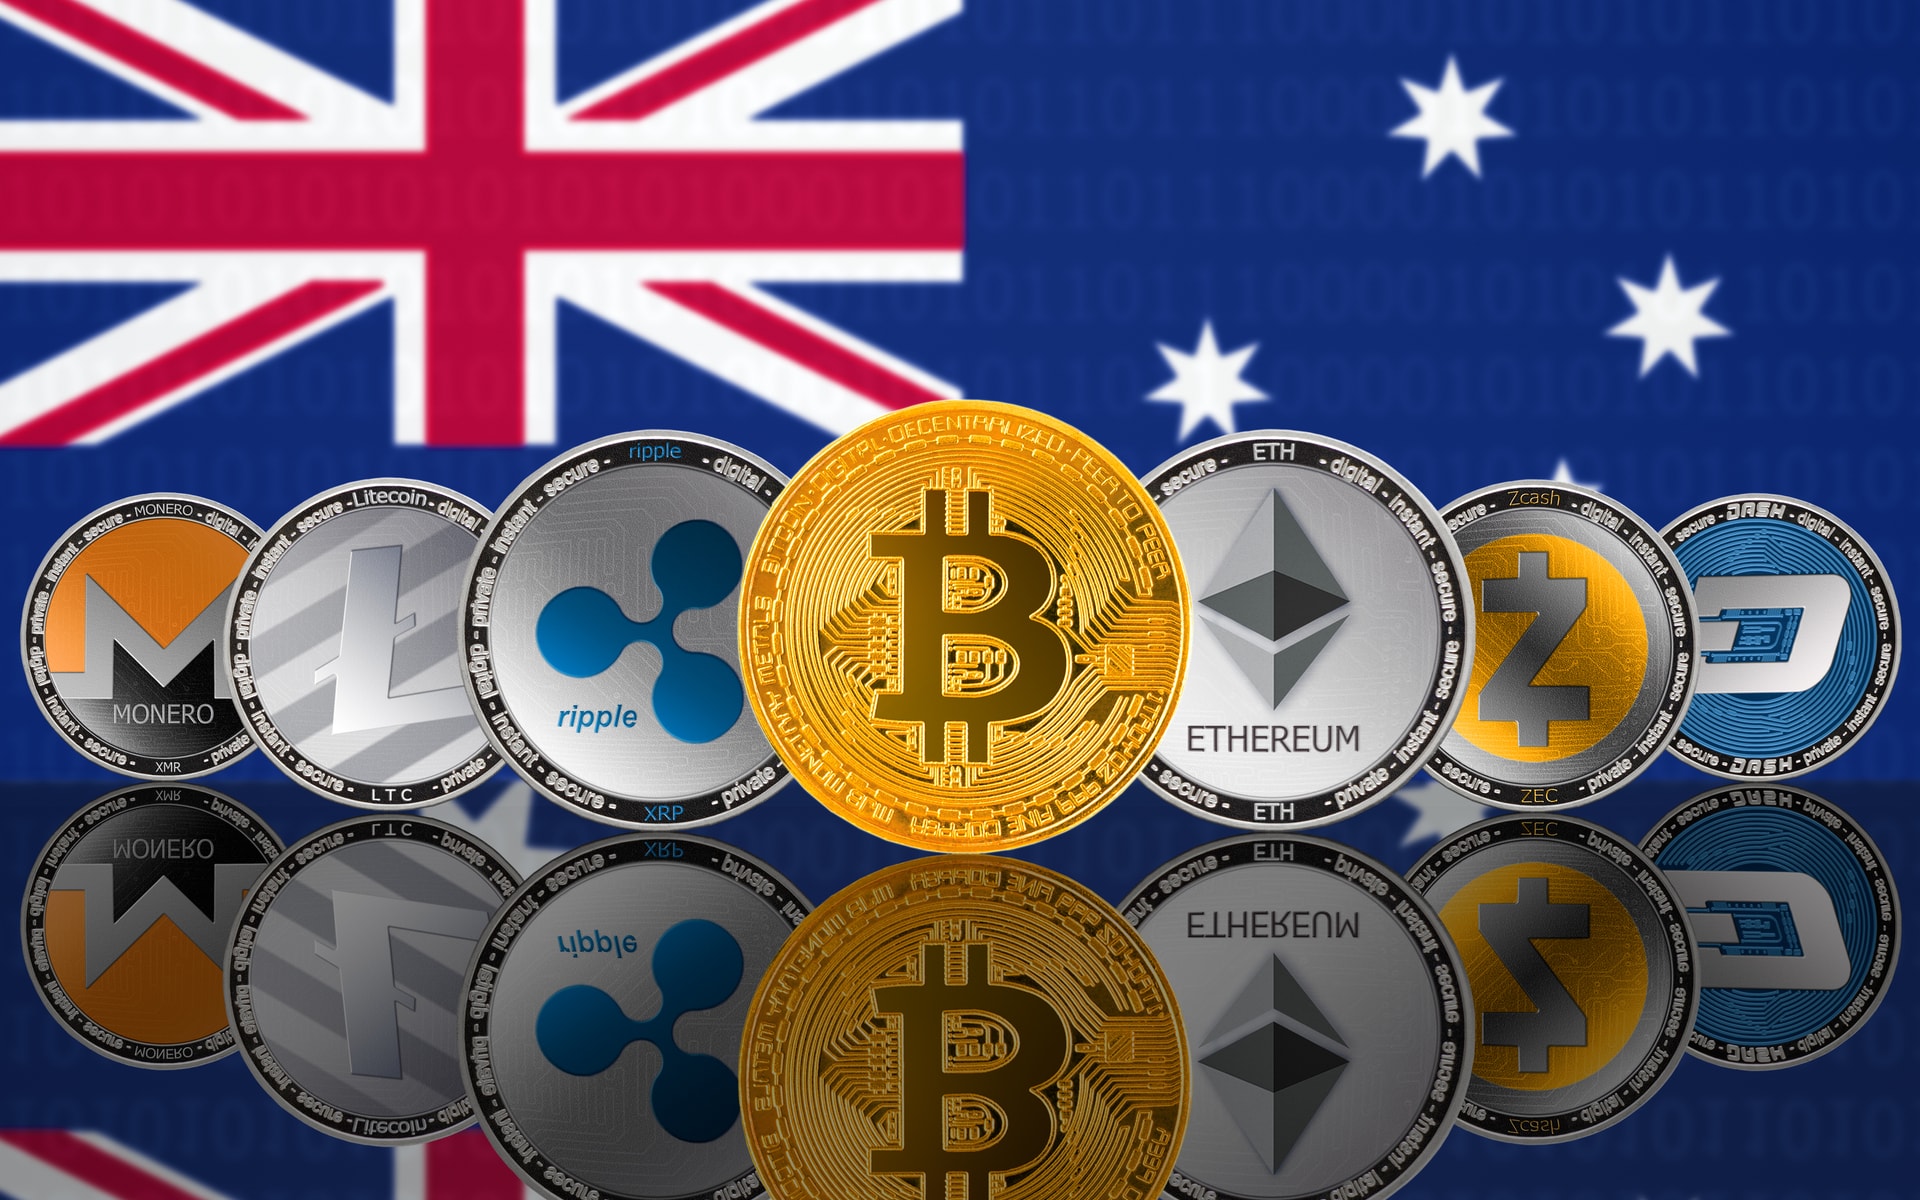 crypto currency shares australian